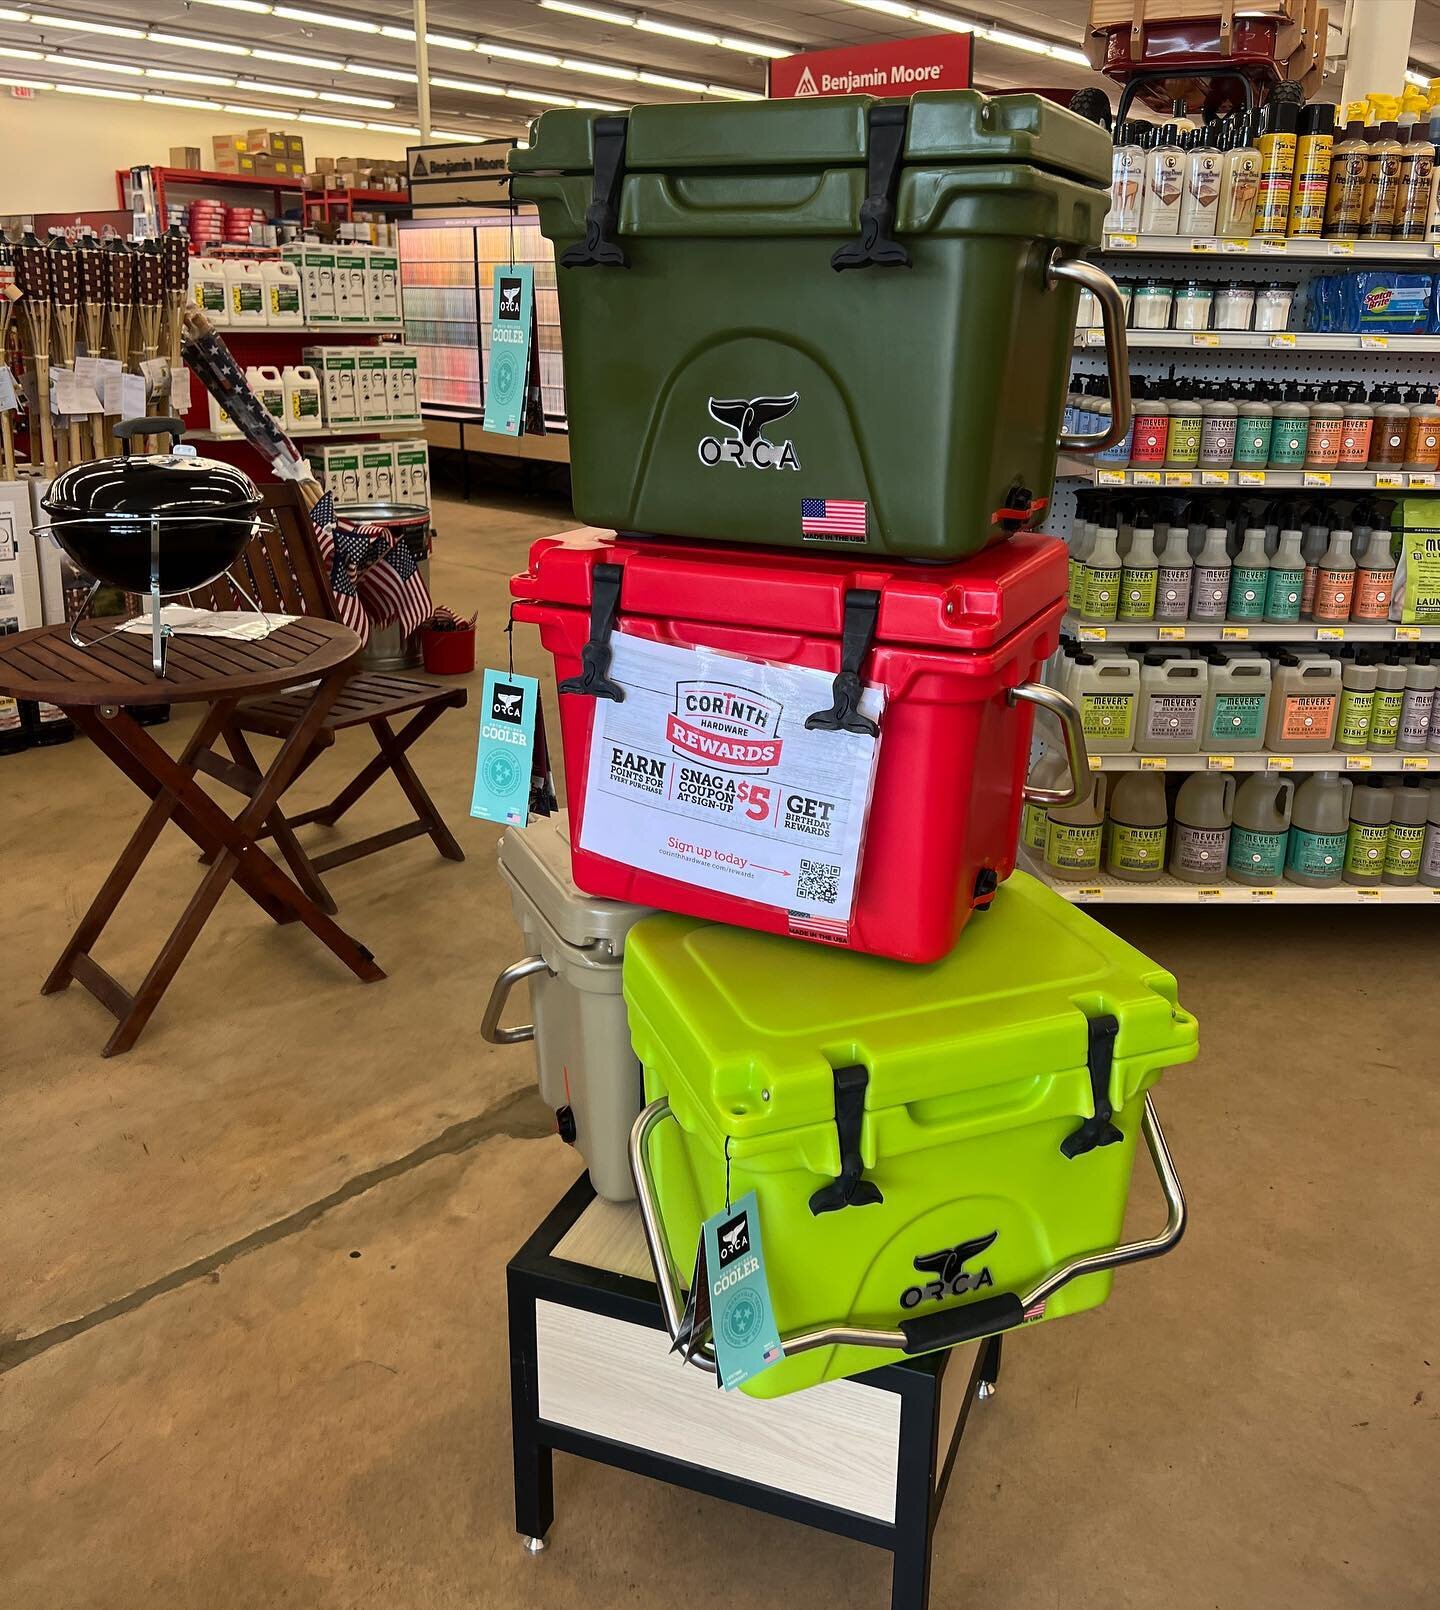 NEW Orca coolers just arrived!! We&rsquo;re loving that bright green for summer! ☀️